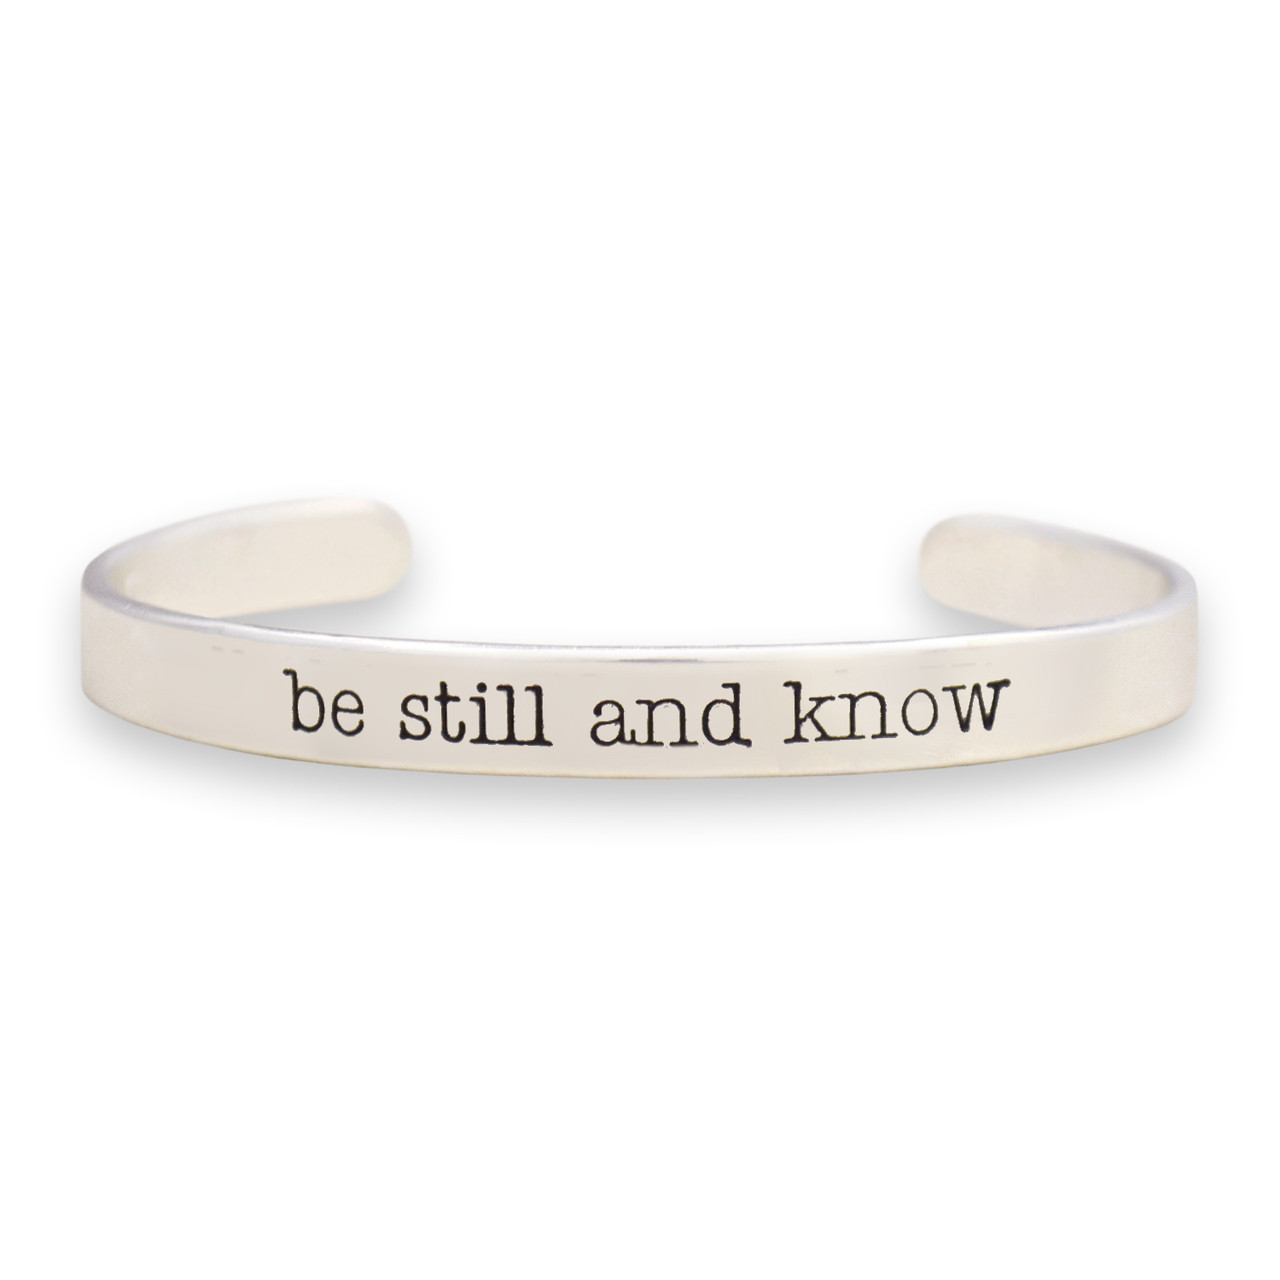 Off the Cuff Collection- "Be Still And Know"